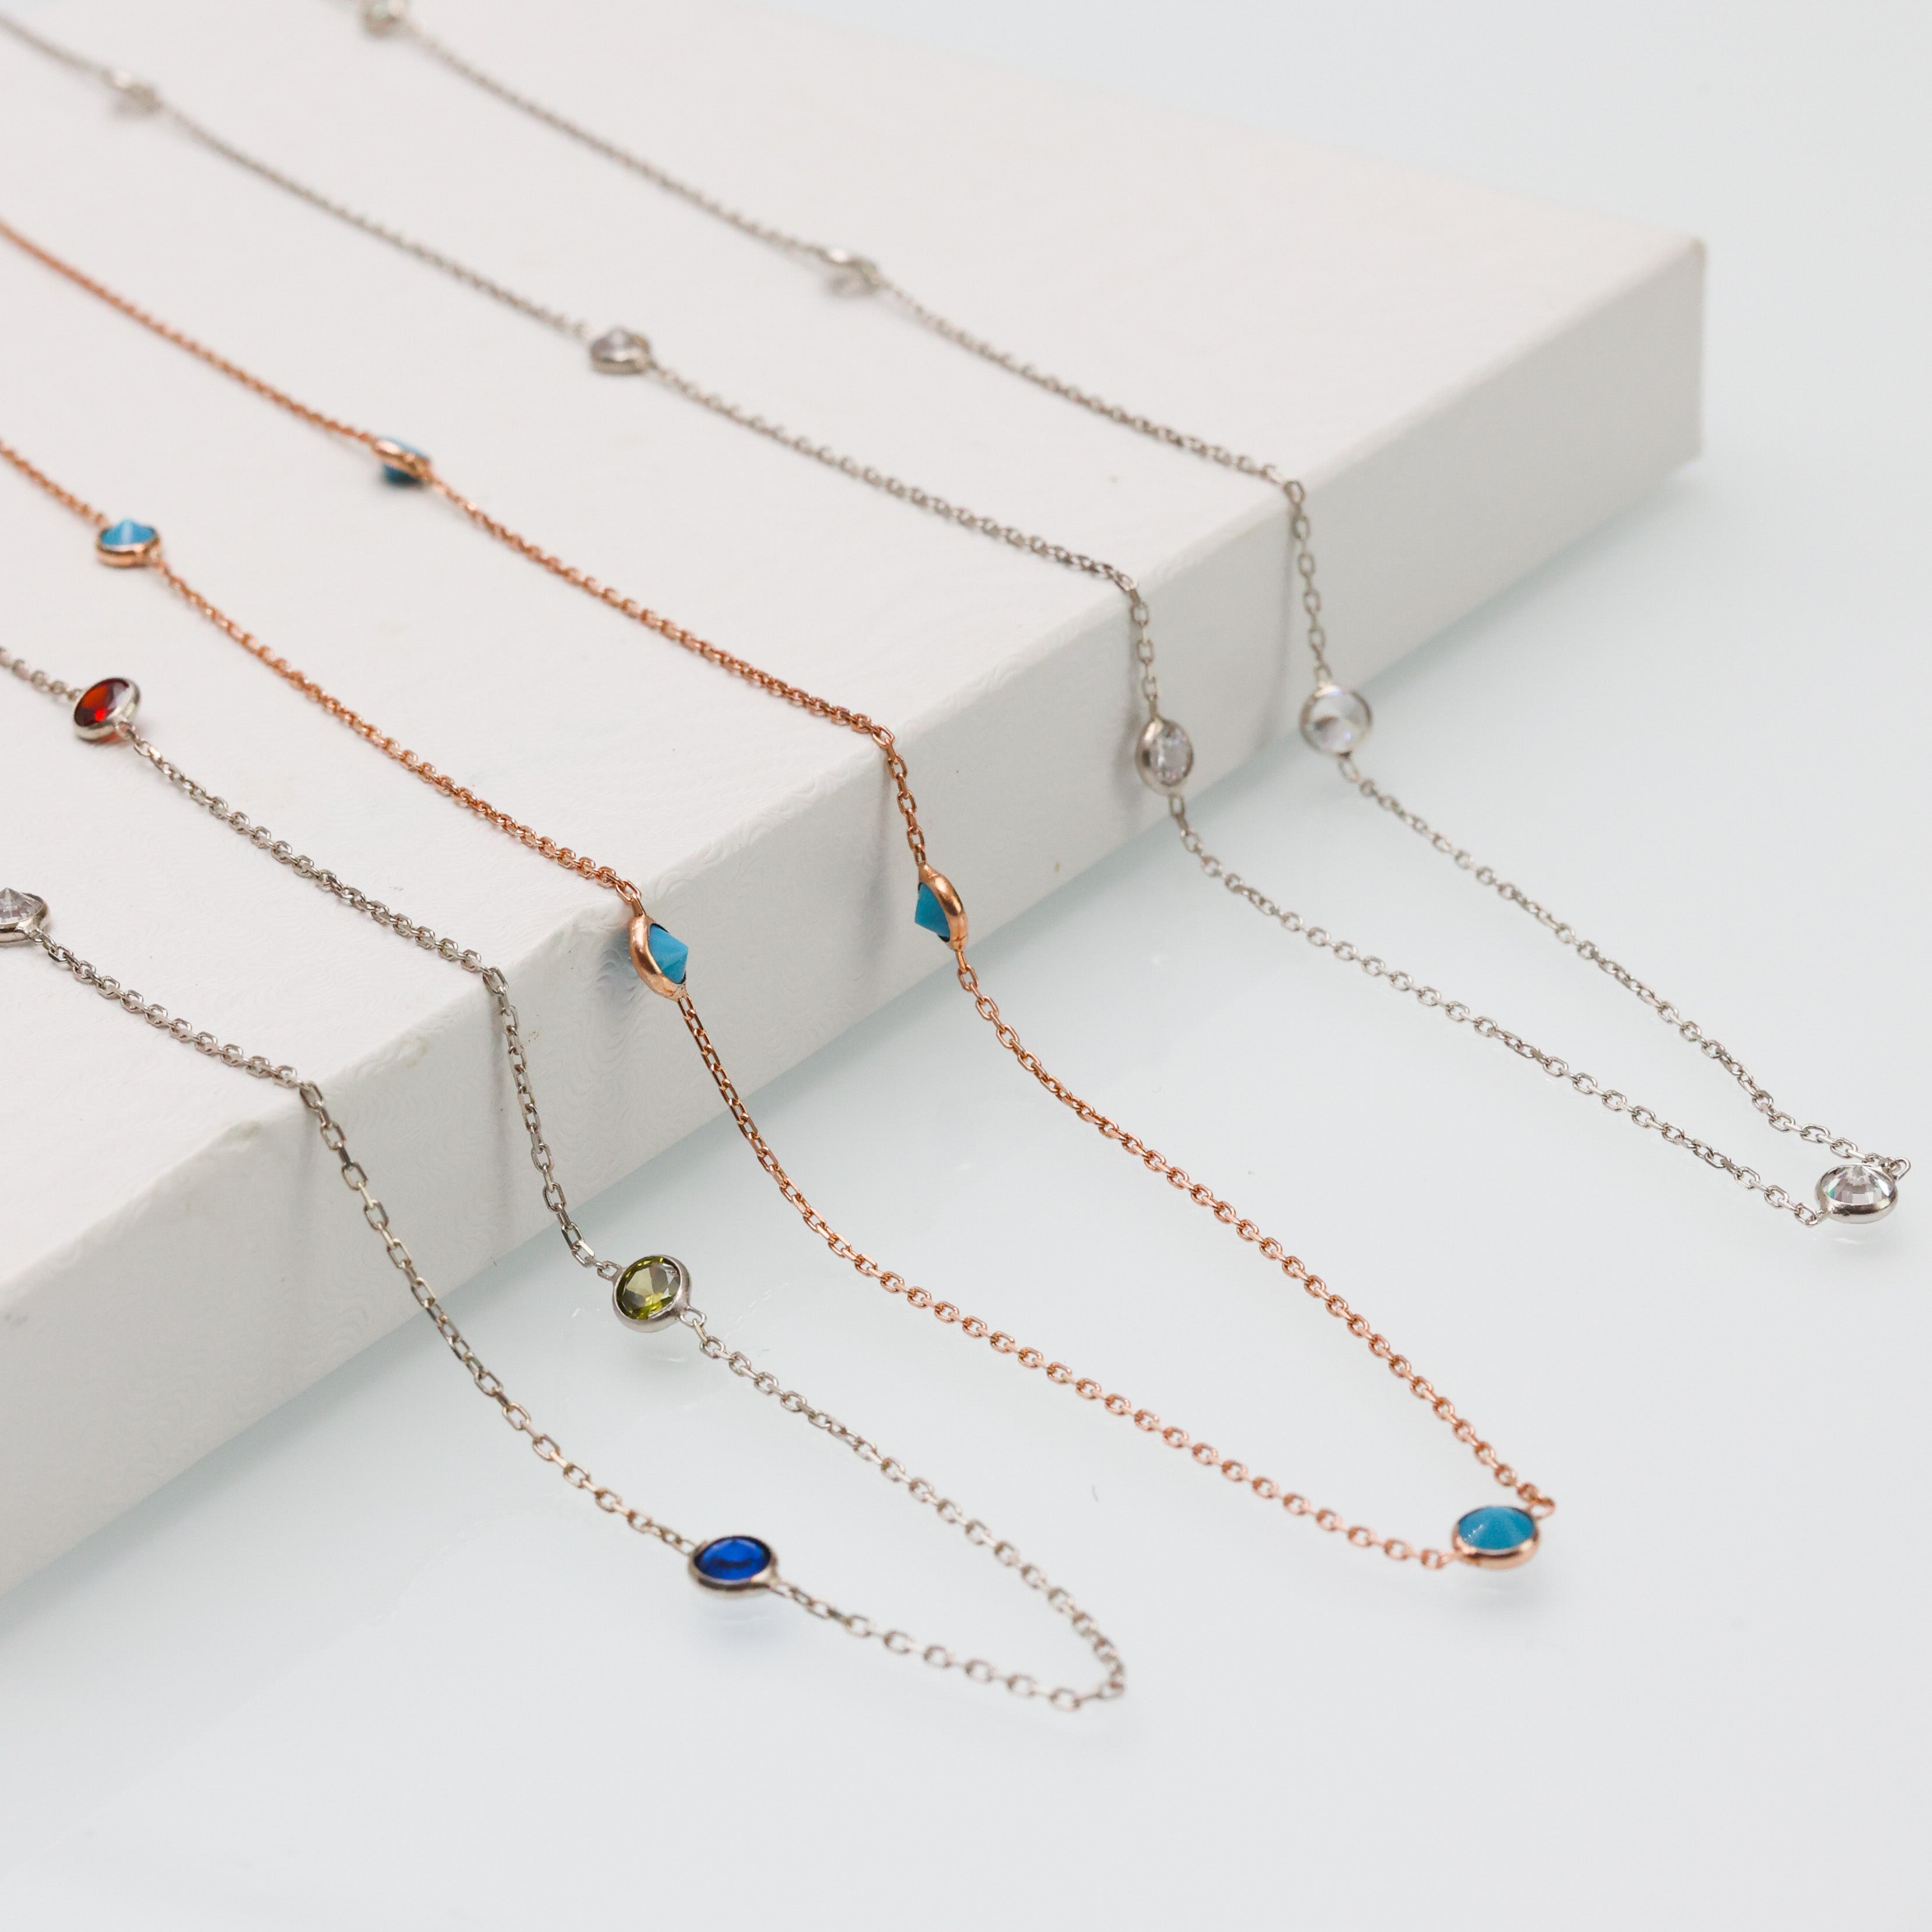 Istiklal Necklace - One meter necklace 